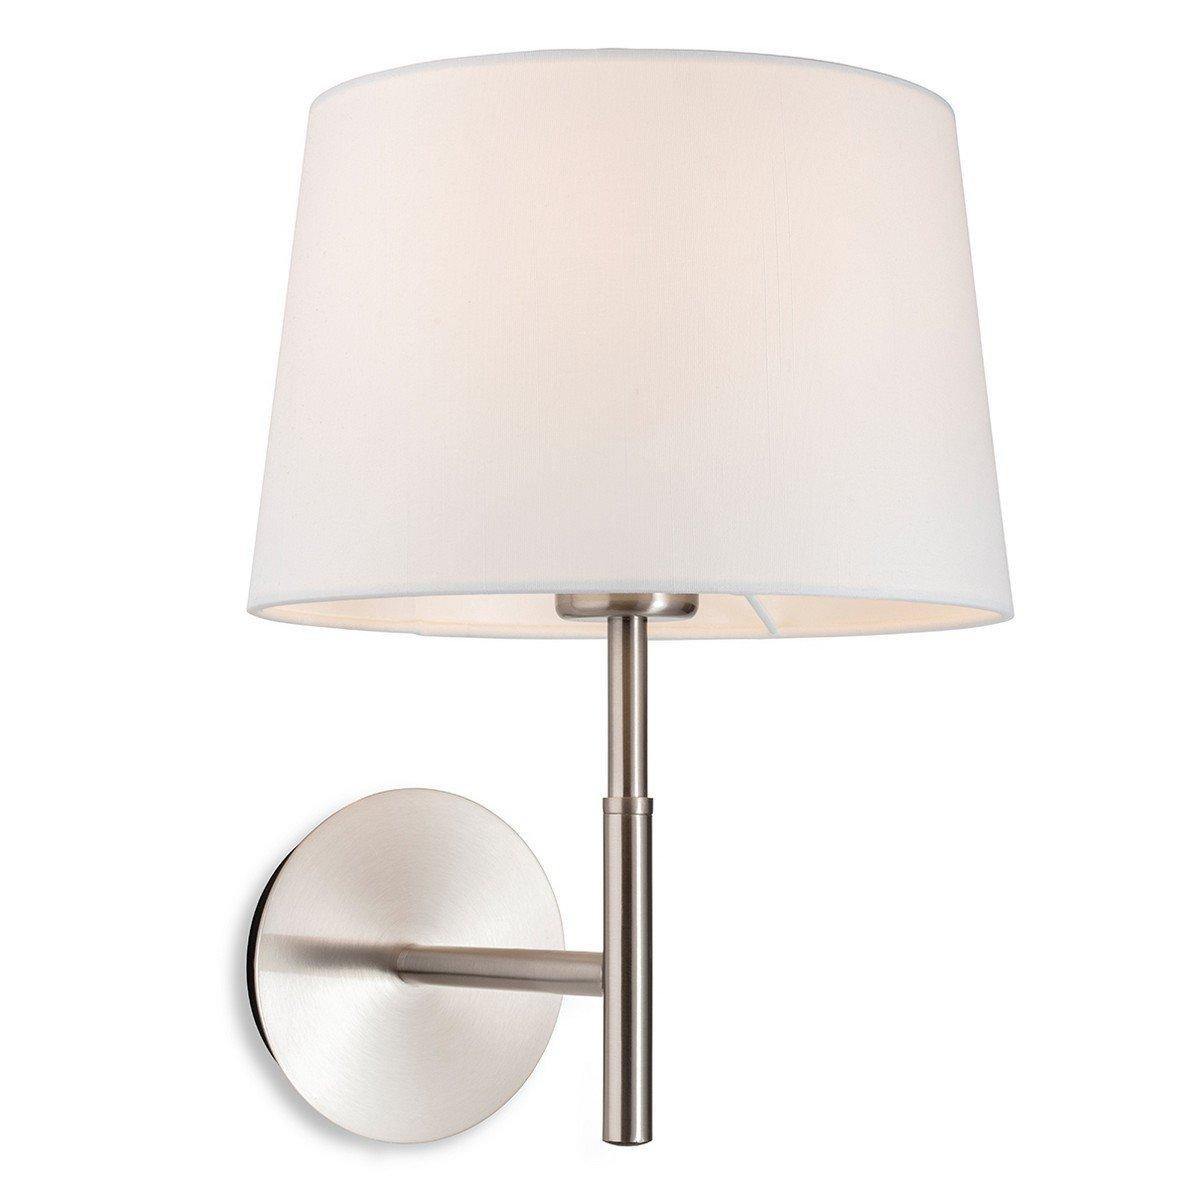 Seymour Classic Switched Wall Lamp Brushed Steel with Cream Shade